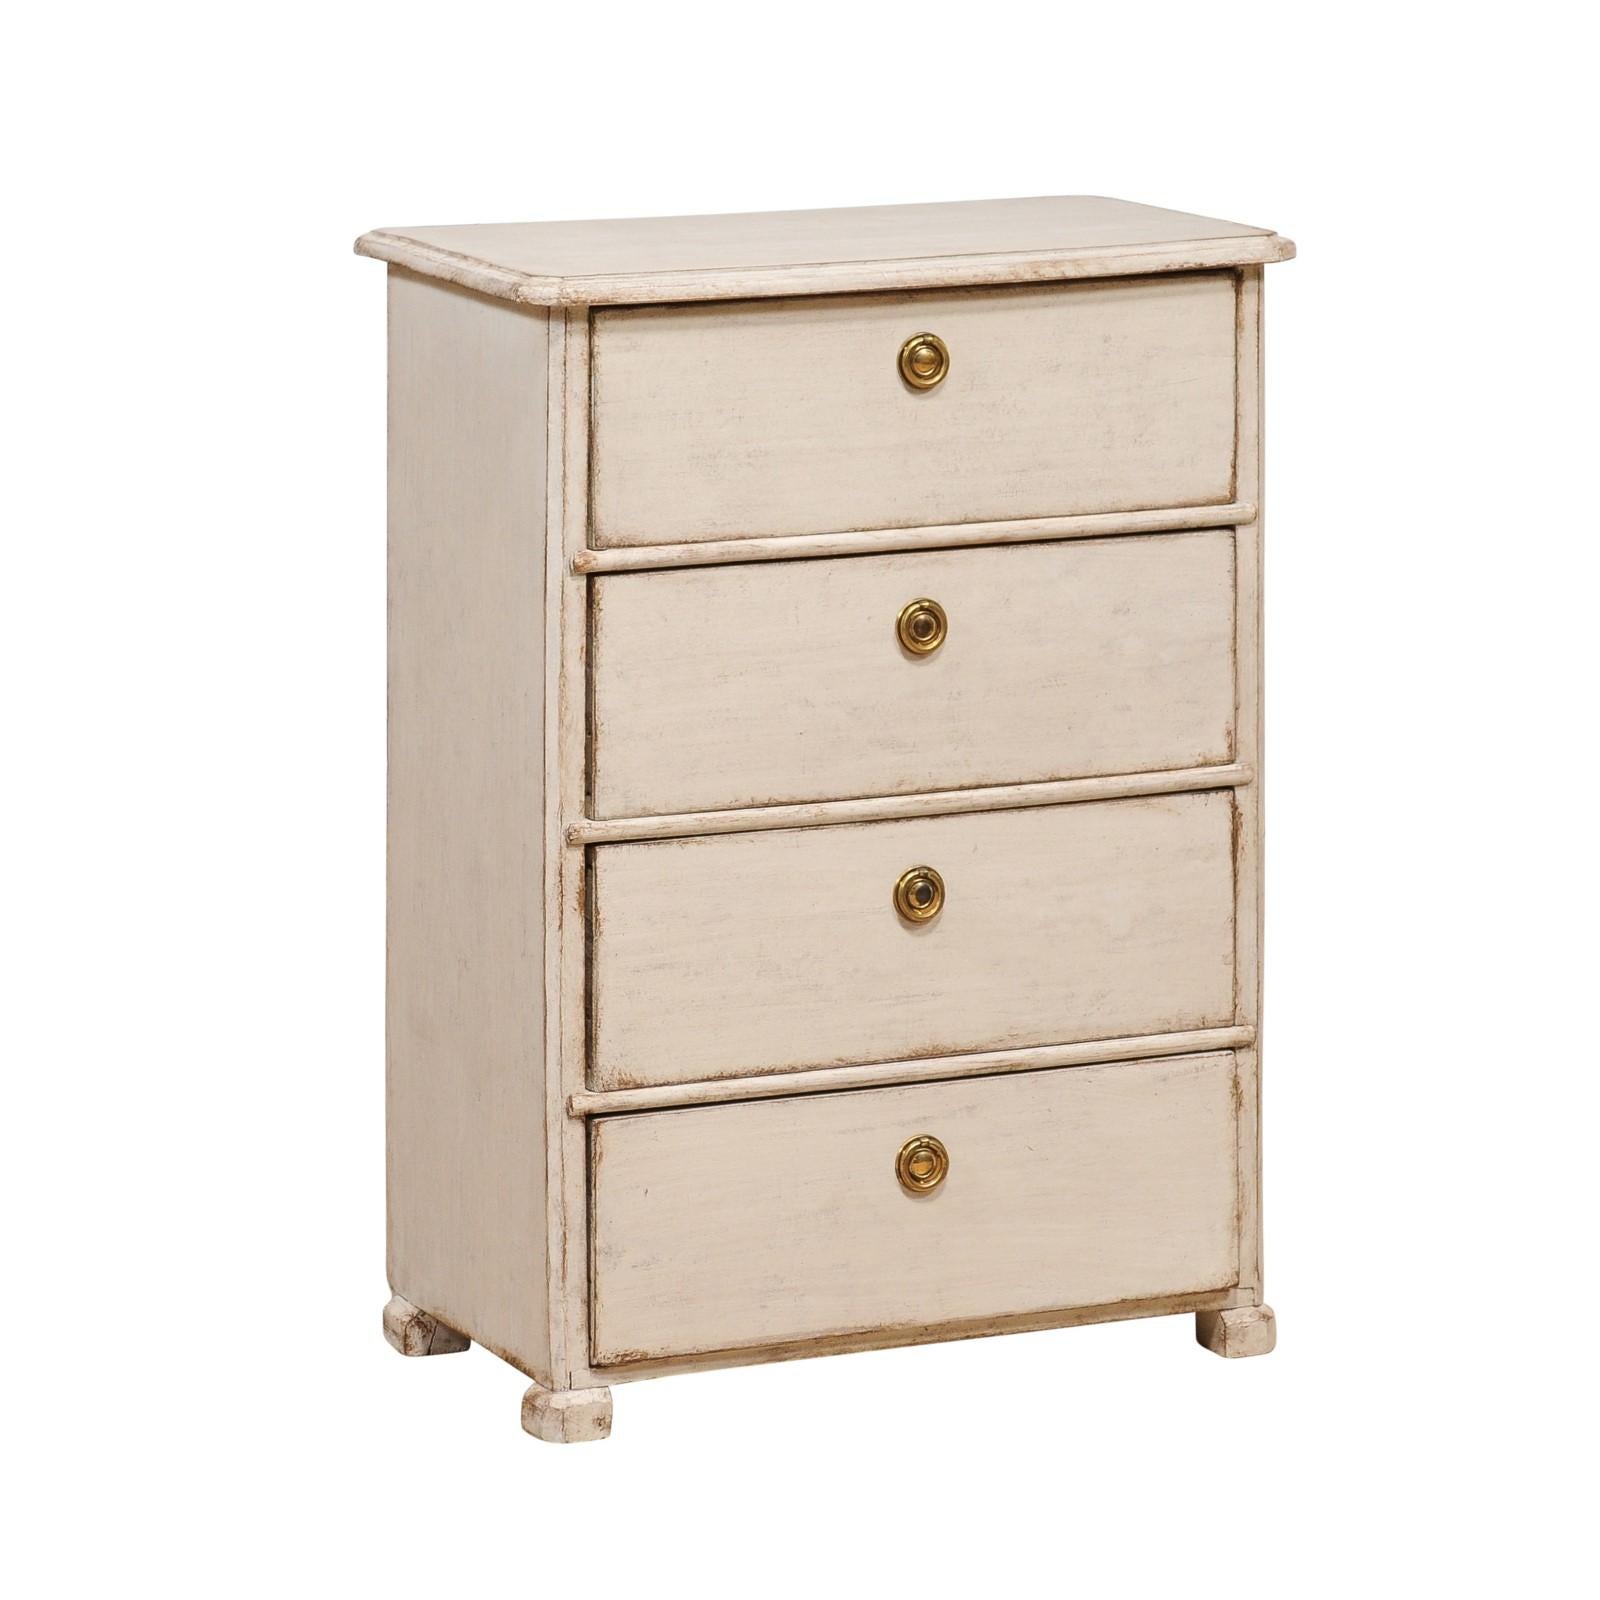 A Swedish painted wood bedside chest from the late 19th century with four drawers, brass hardware, petite block feet. Embrace the understated elegance of Nordic design with this late 19th-century Swedish bedside chest. This beautifully crafted piece